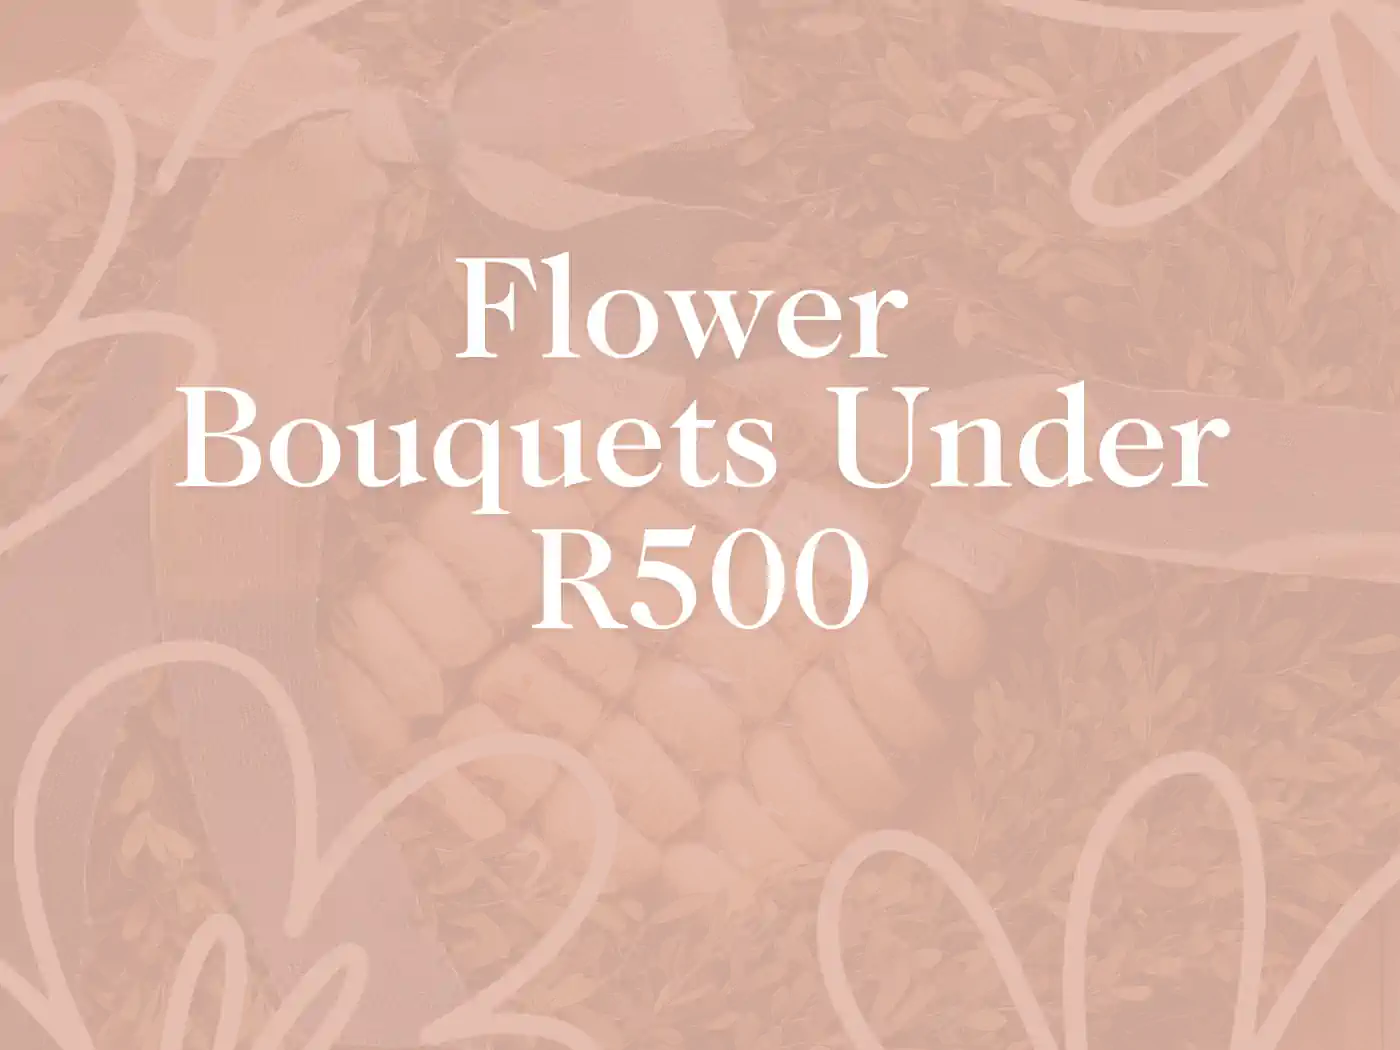 Promotional image highlighting Flower Bouquets Under R500, featuring soft pastel tones and floral elements, showcasing affordable elegance delivered with heart by Fabulous Flowers and Gifts.